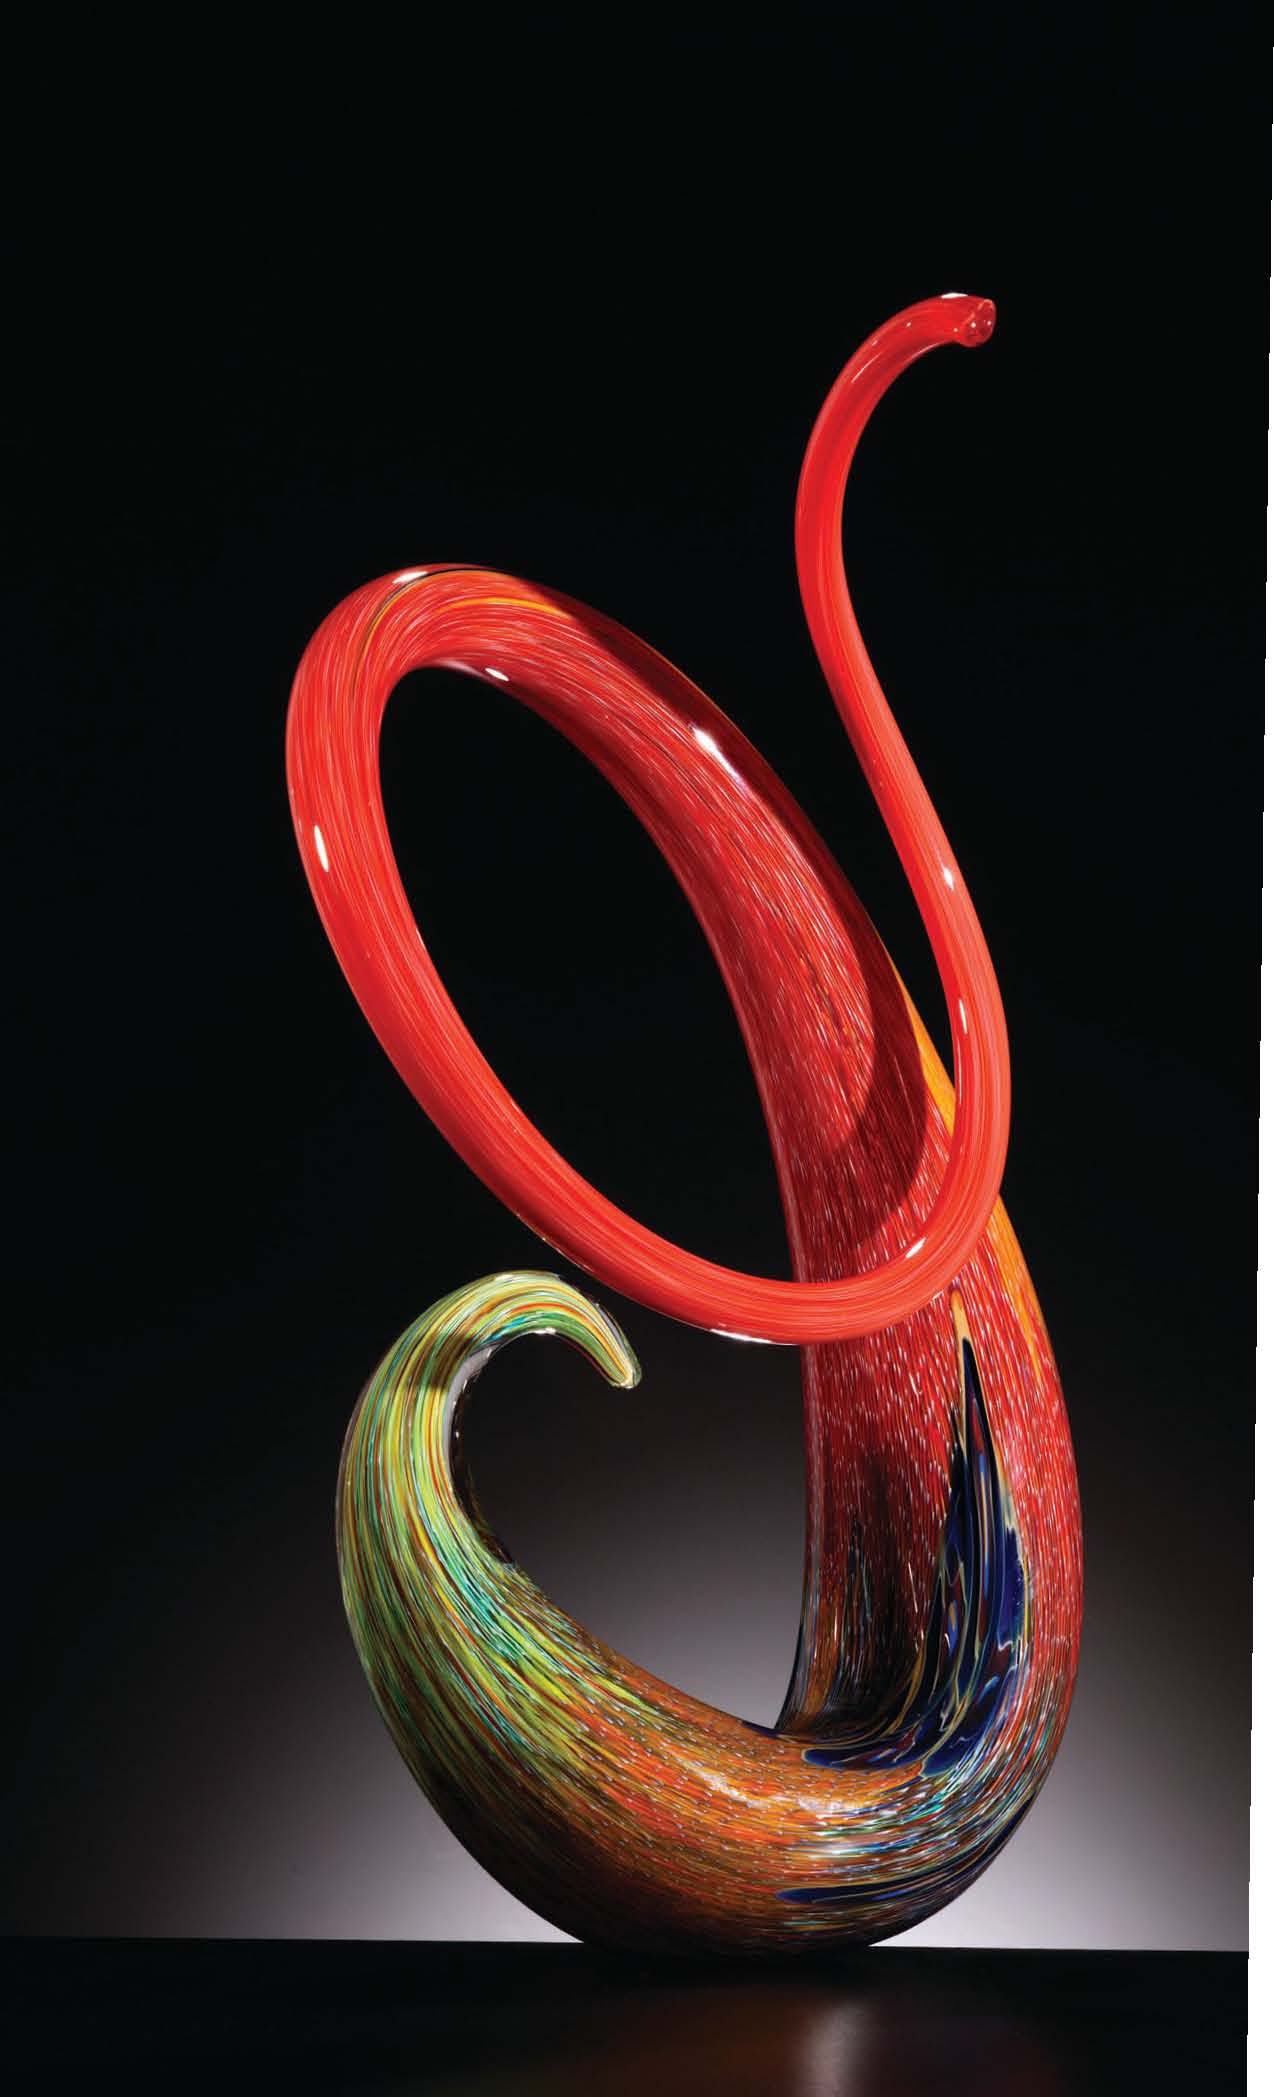 Montague Gallery represents a range of glass artists, including Lino Tagliapietra, “Fenice” (2019, blown glass), 22.5 inches by 12.5 inches by 12 inches. PHOTO COURTESY OF MONTAGUE GALLERY